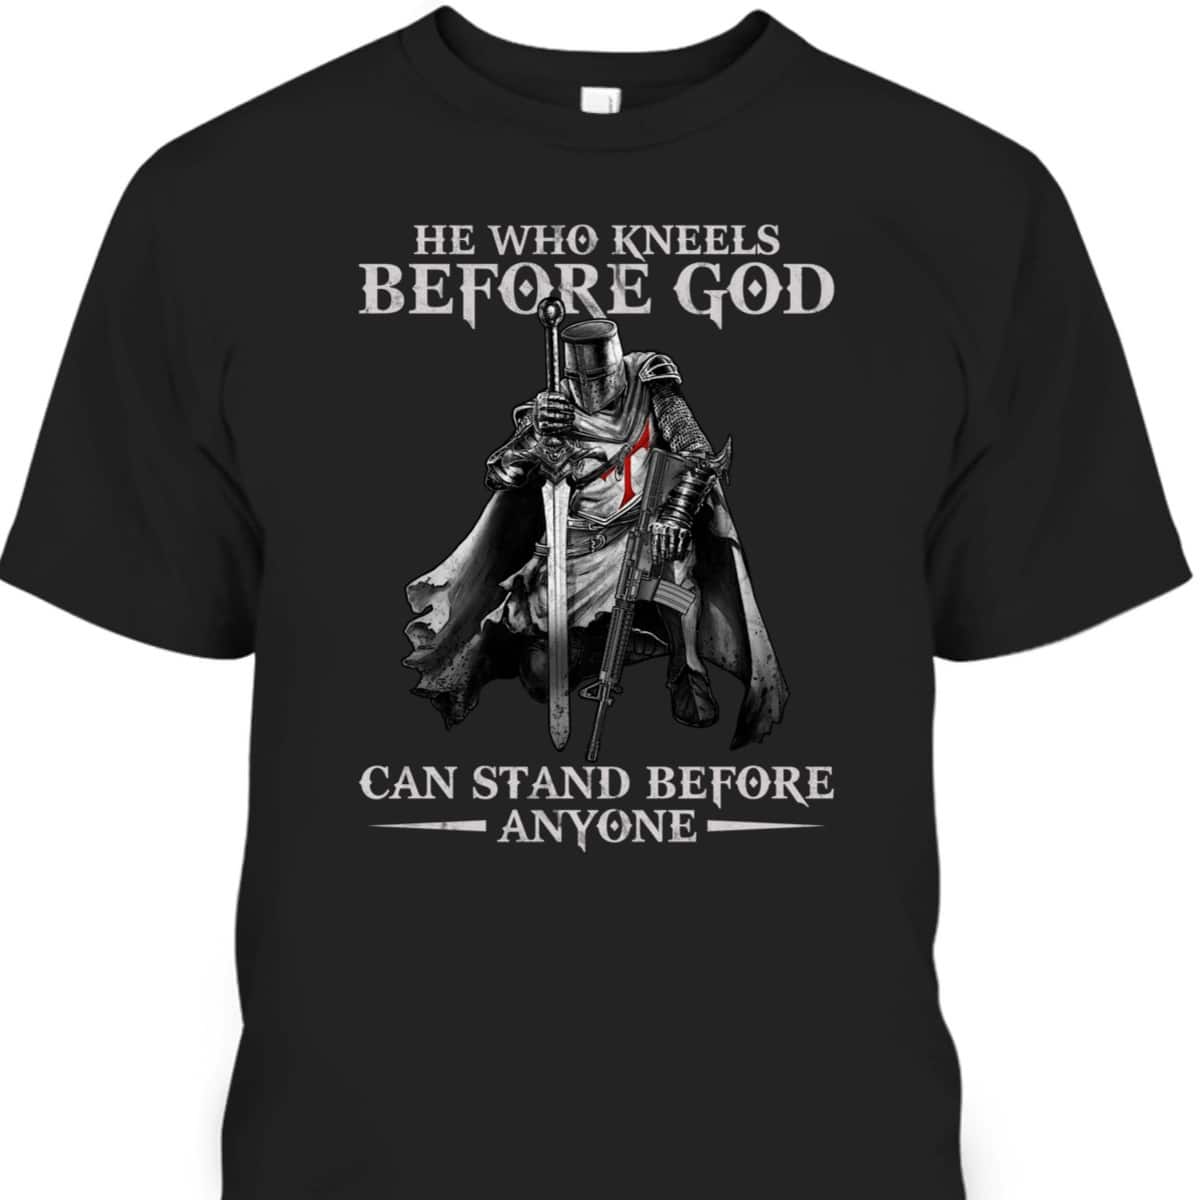 Knights Templar Armor Of God T-Shirt He Who Kneels Before God Can Stand Before Anyone